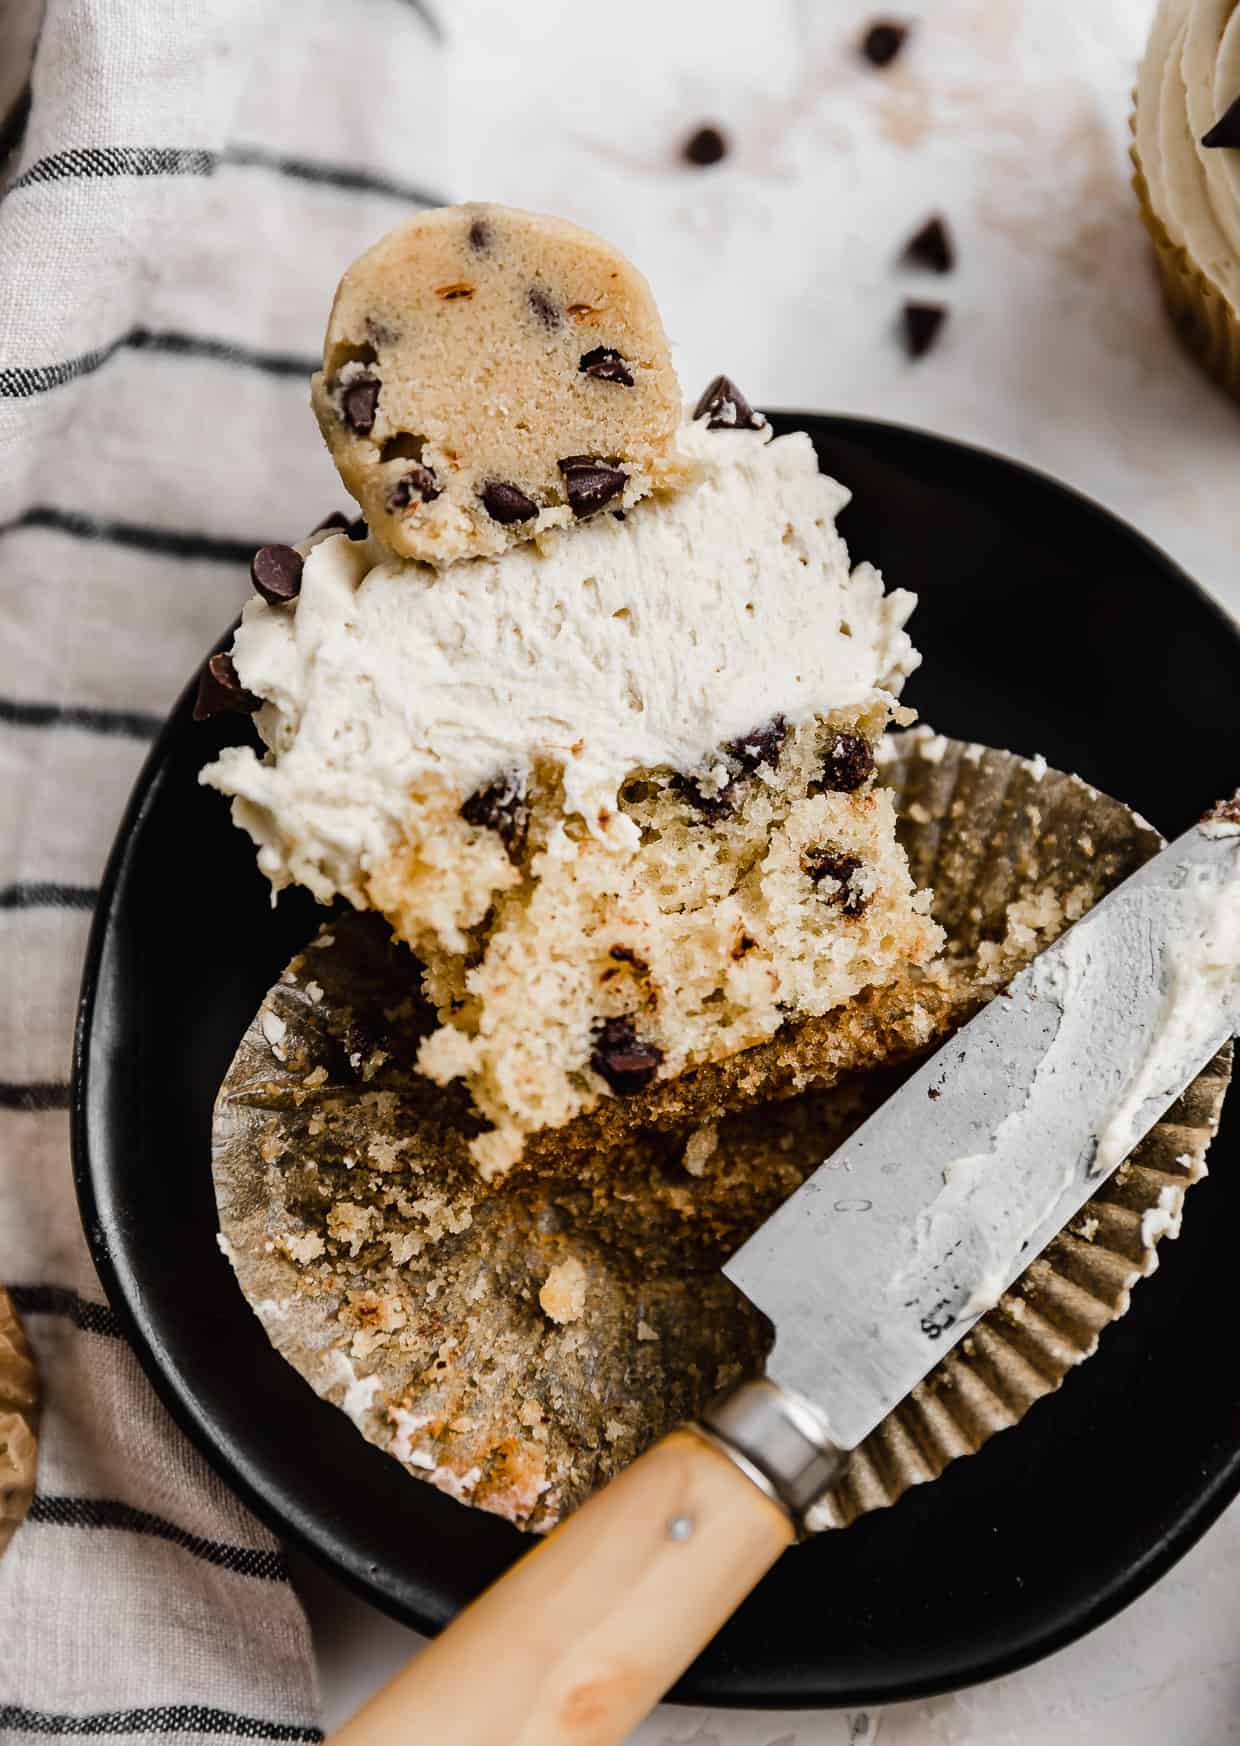 A Cookie Dough Cupcake cut in half showing, on a black plate.